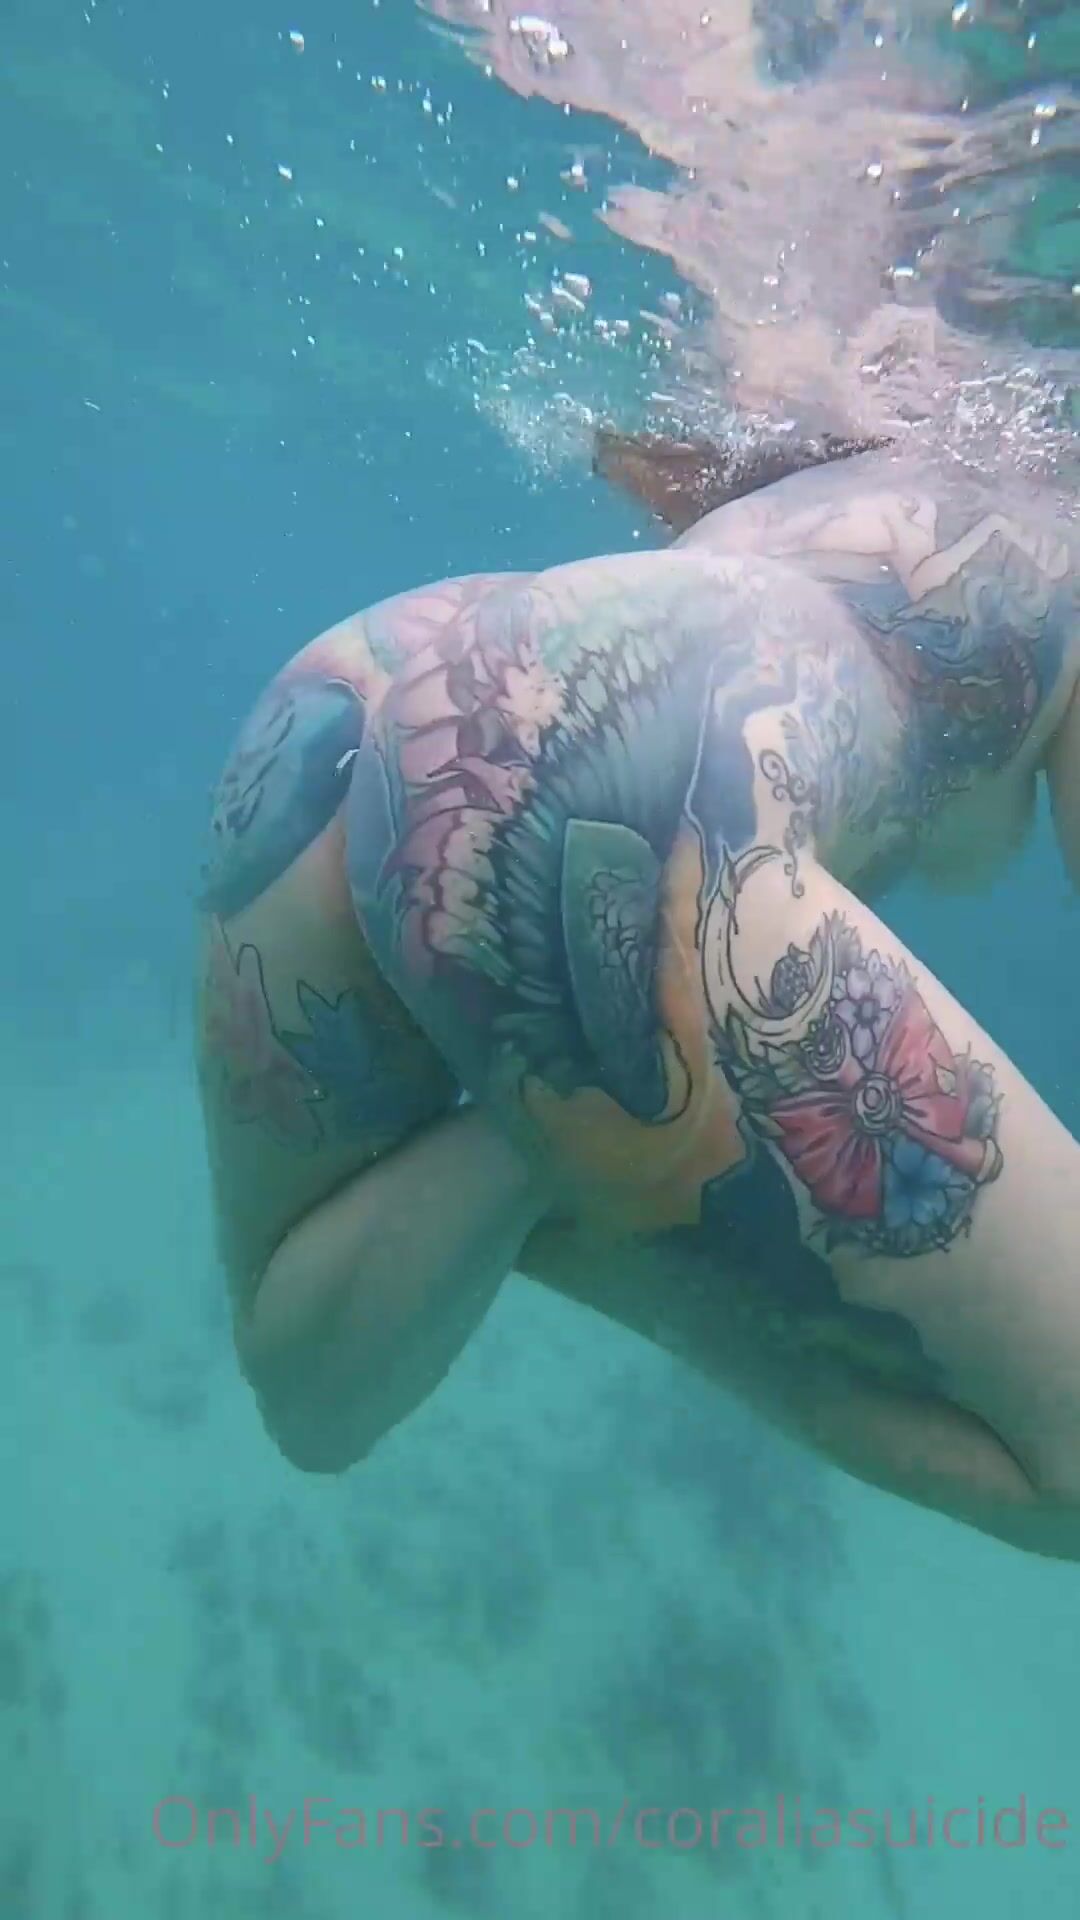 Coraliasuicide Naked Snorkeling In Coral Reef In Hawaii New Video On